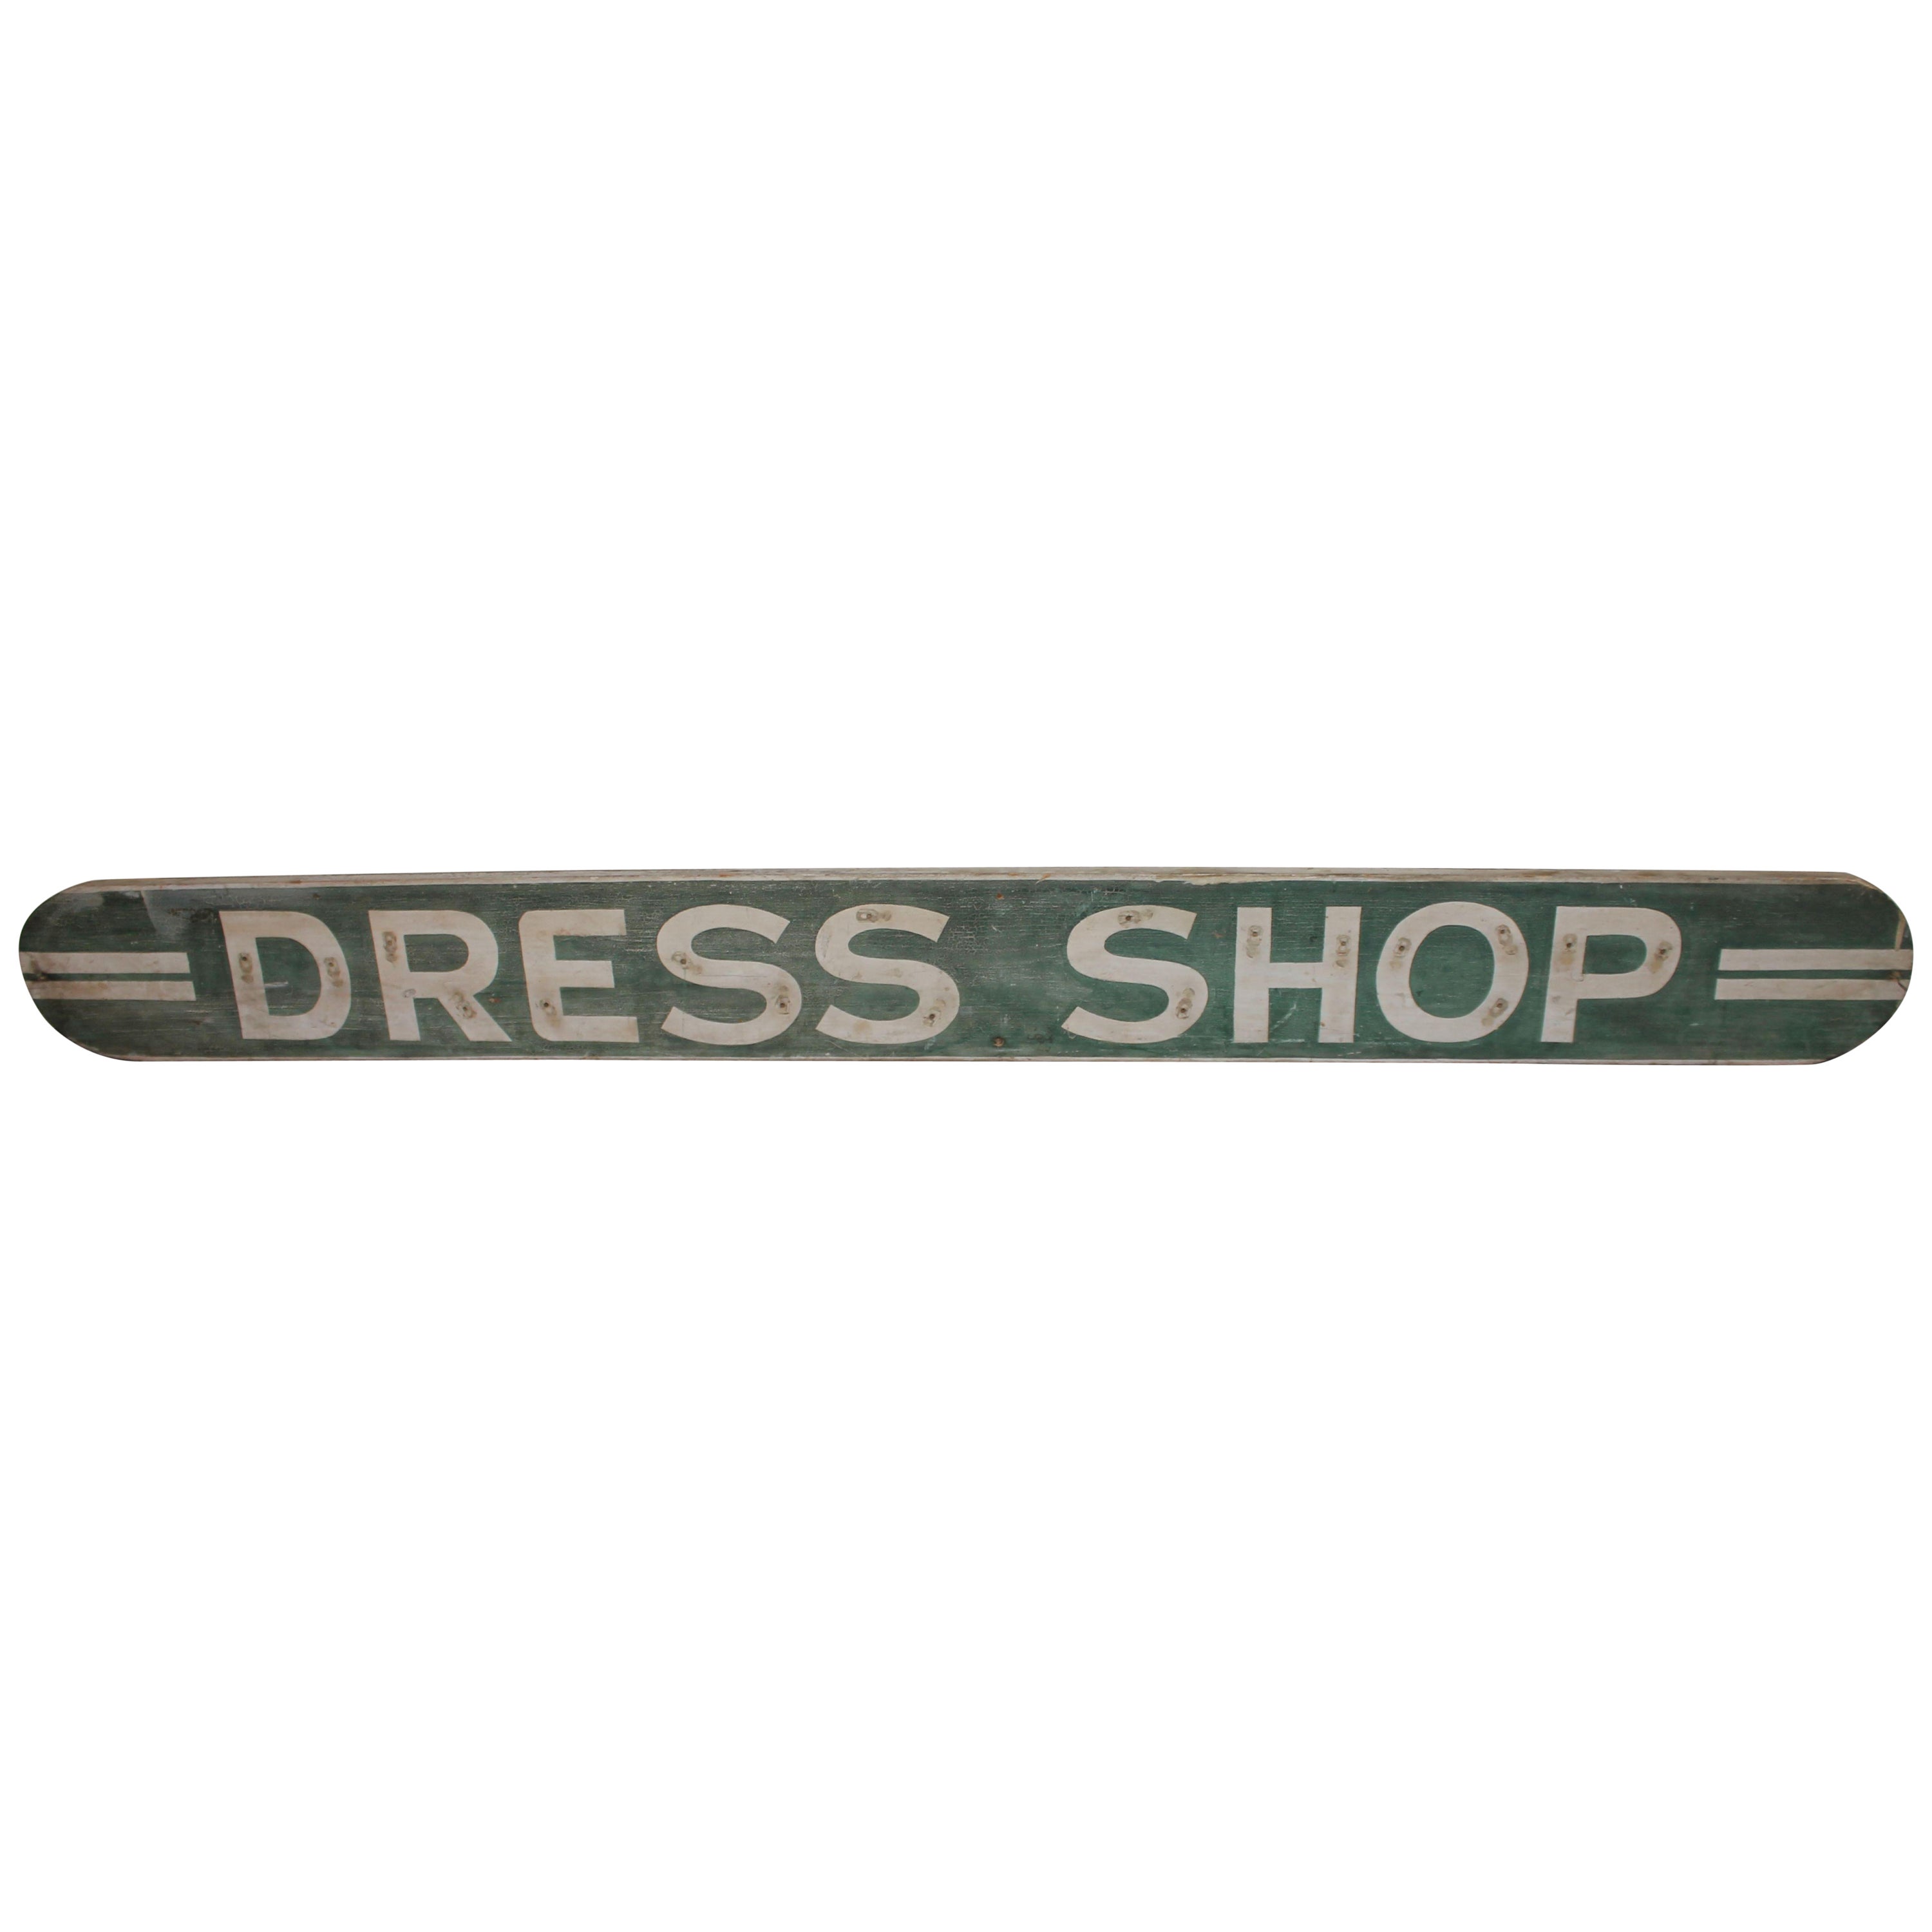 Early Original Painted Dress Shop Trade Sign